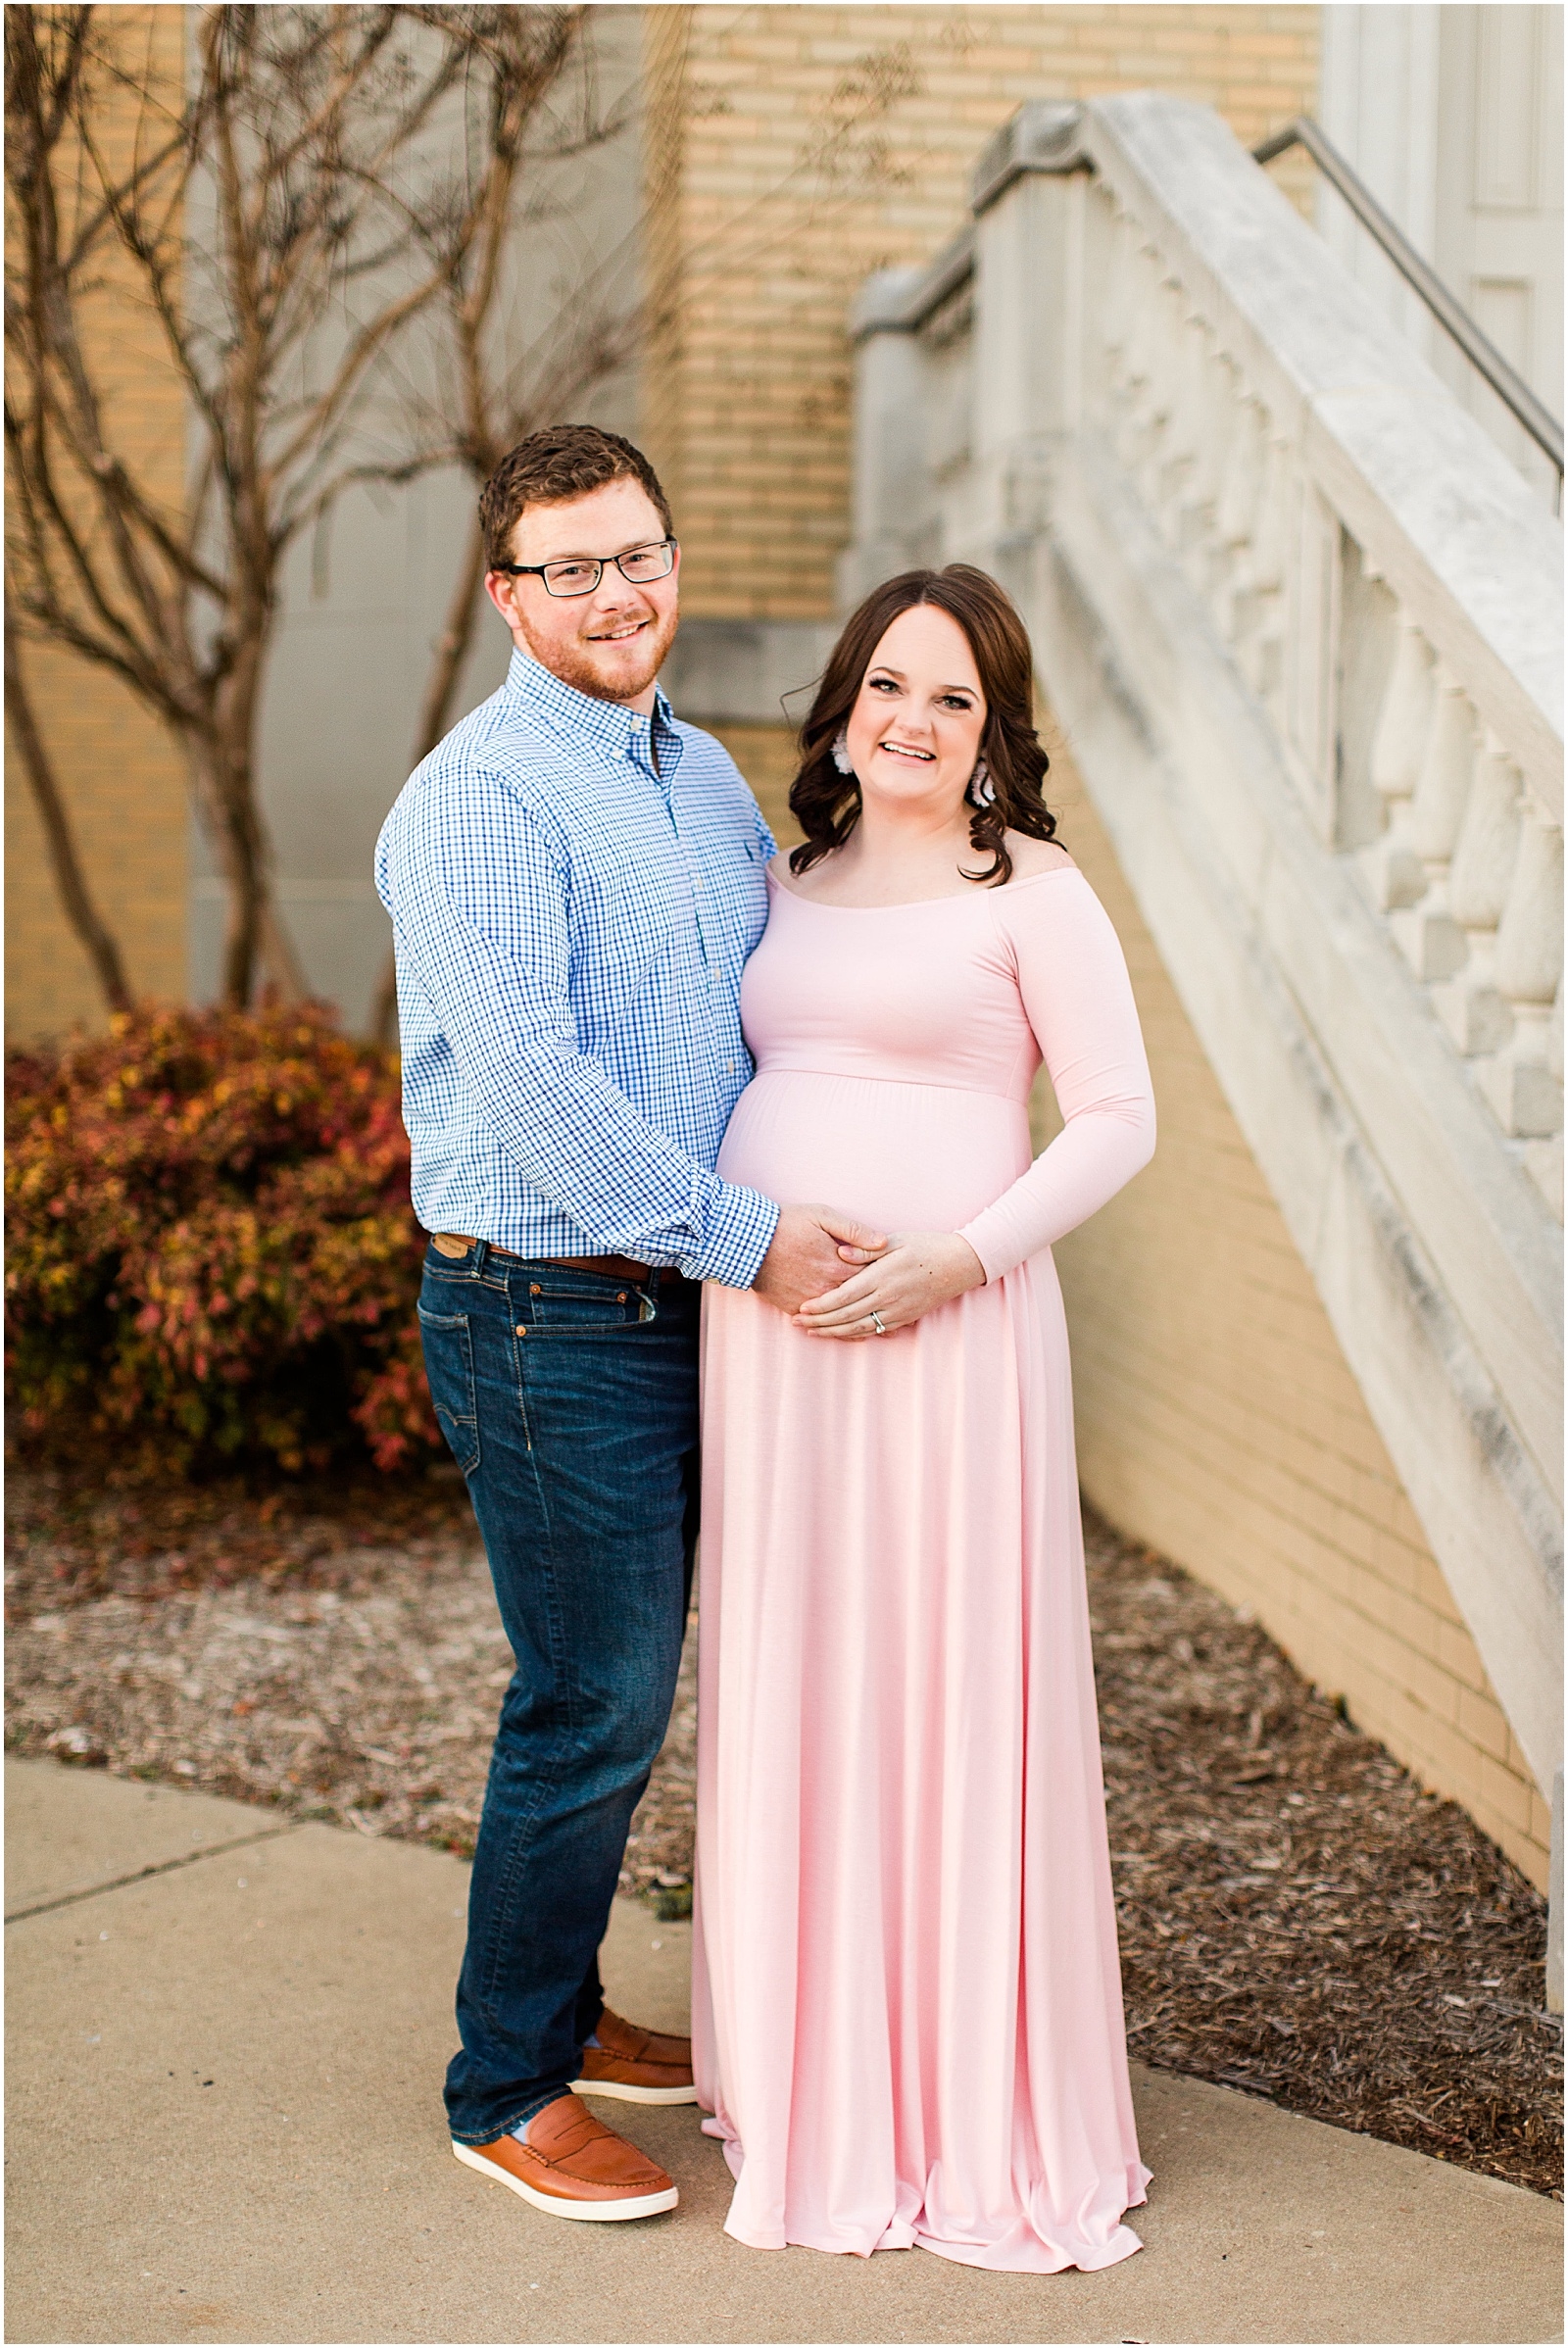 A Downtown Owensboro Maternity Session | Kayla and Grant Evansville Indiana Wedding Photographers-0023.jpg